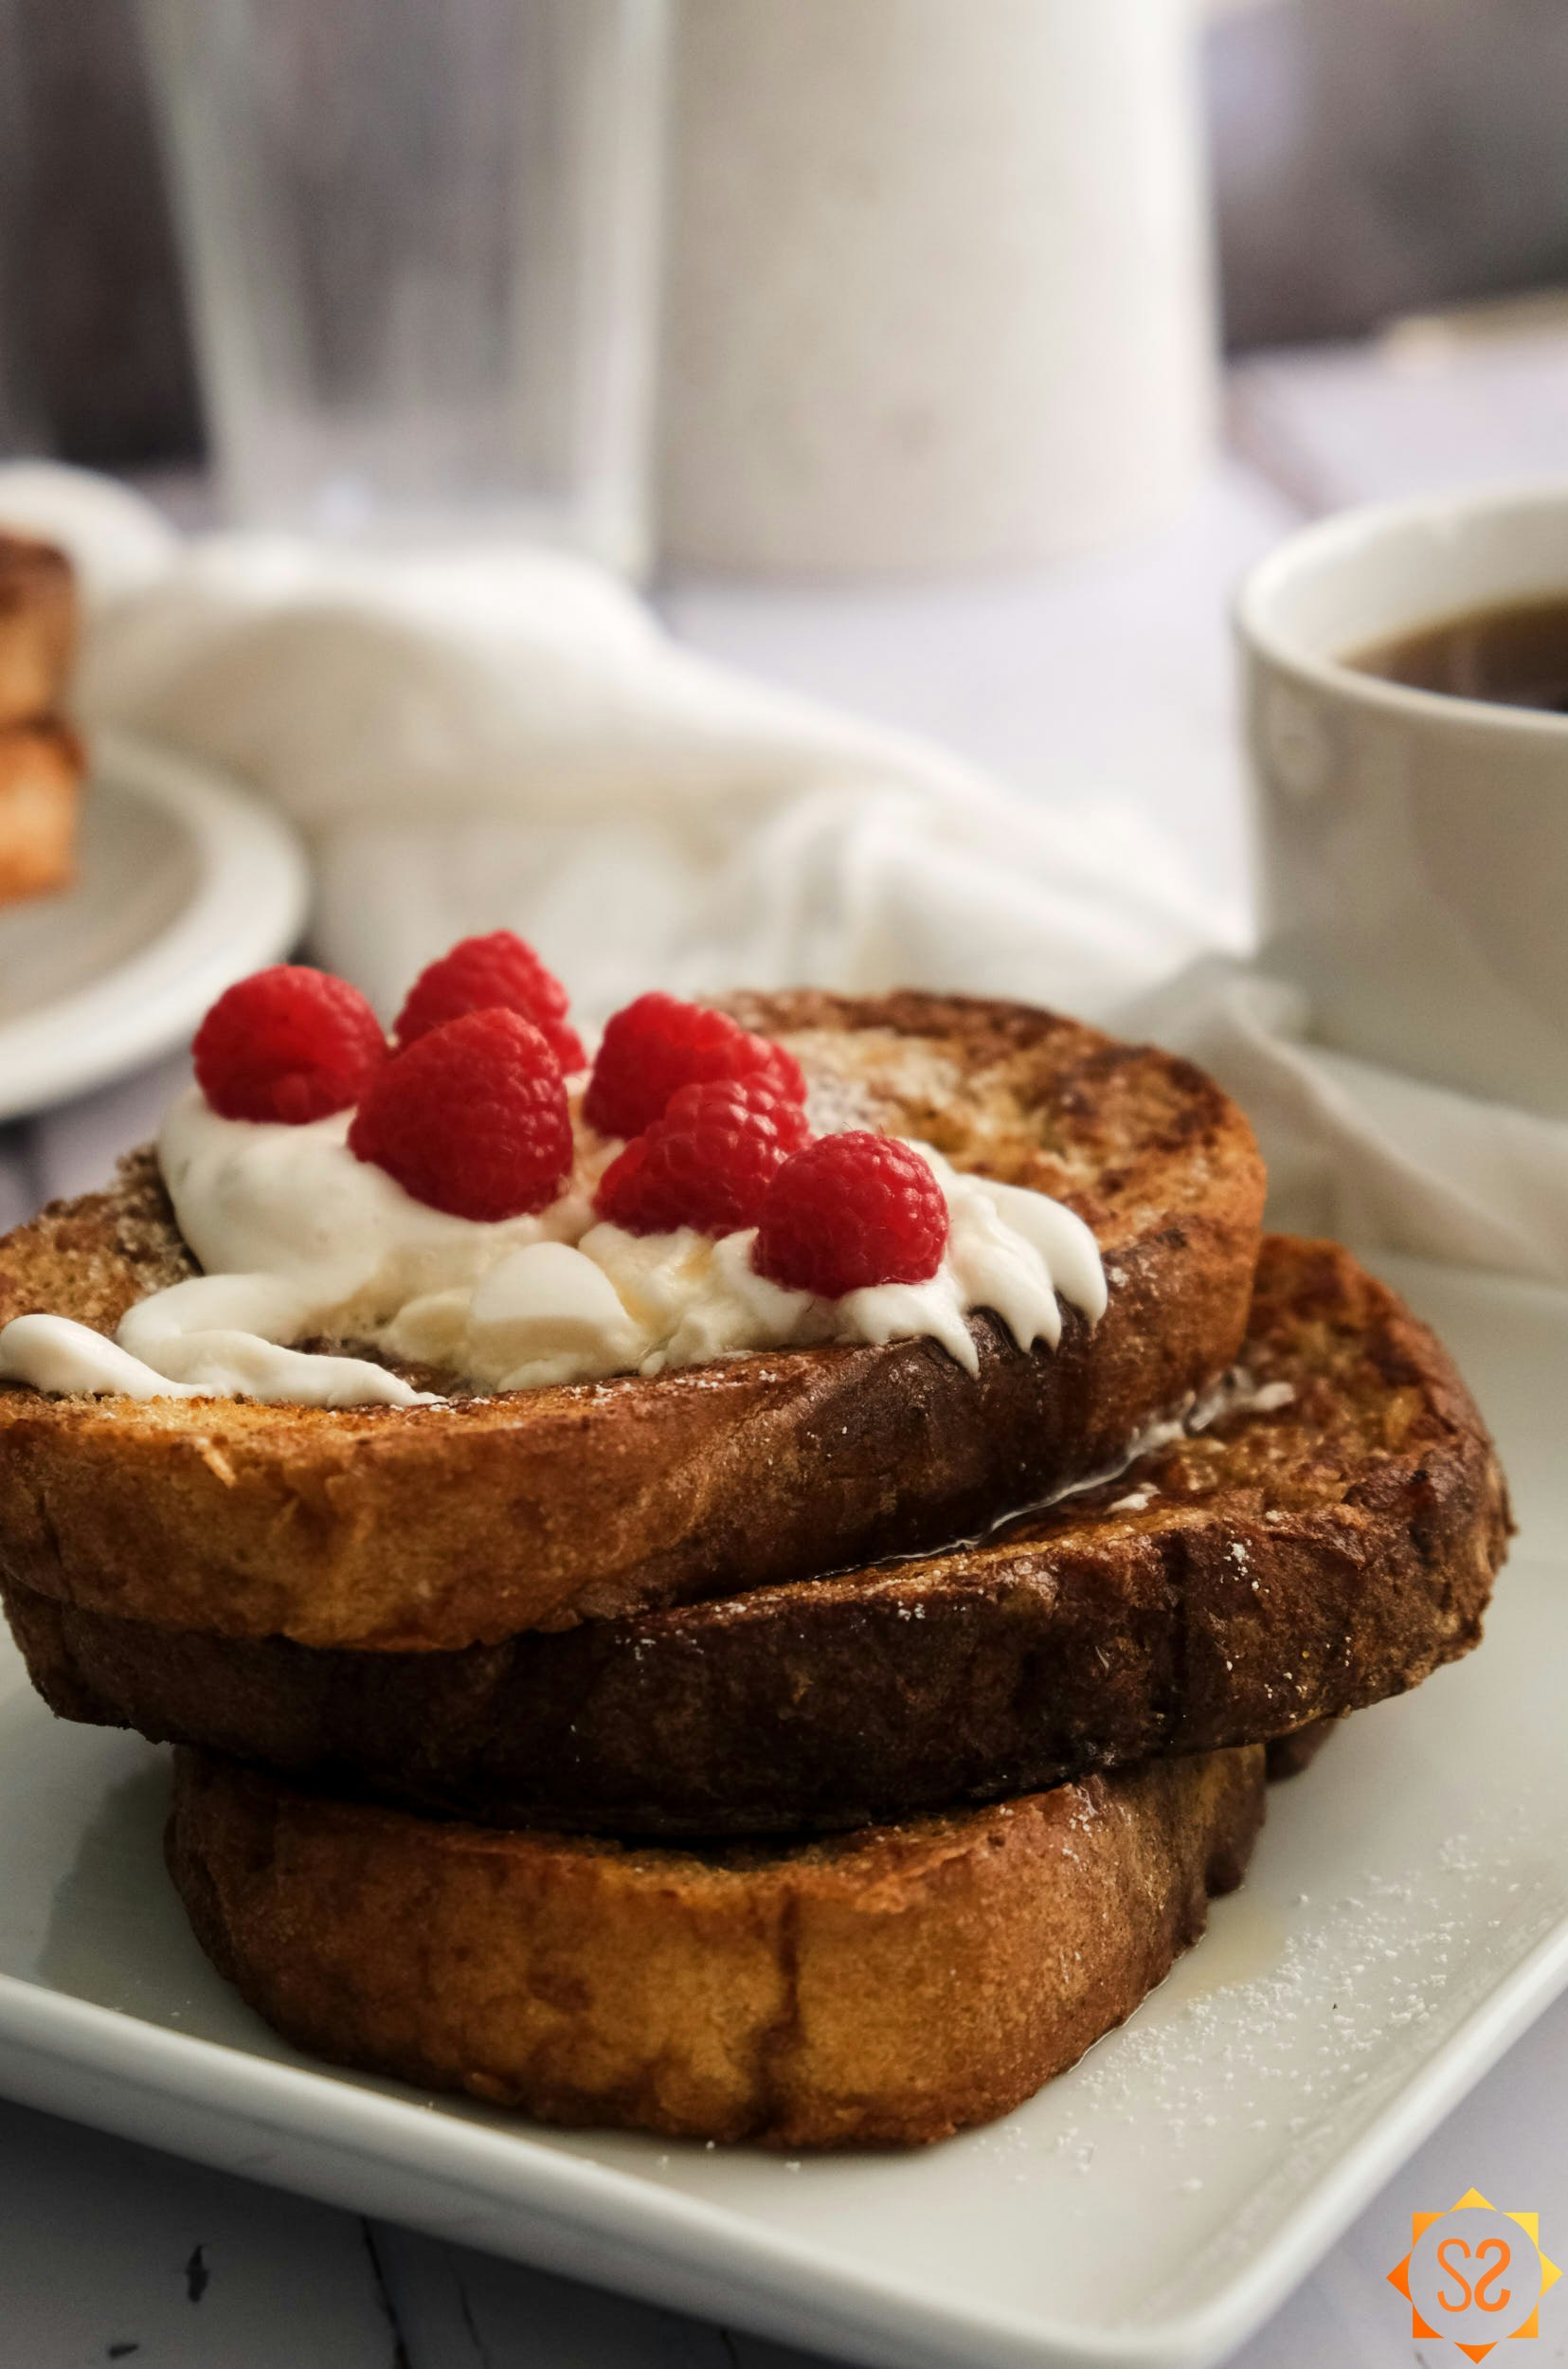 A stack of French toast with a cup of coffee and a pitcher of juice in the background